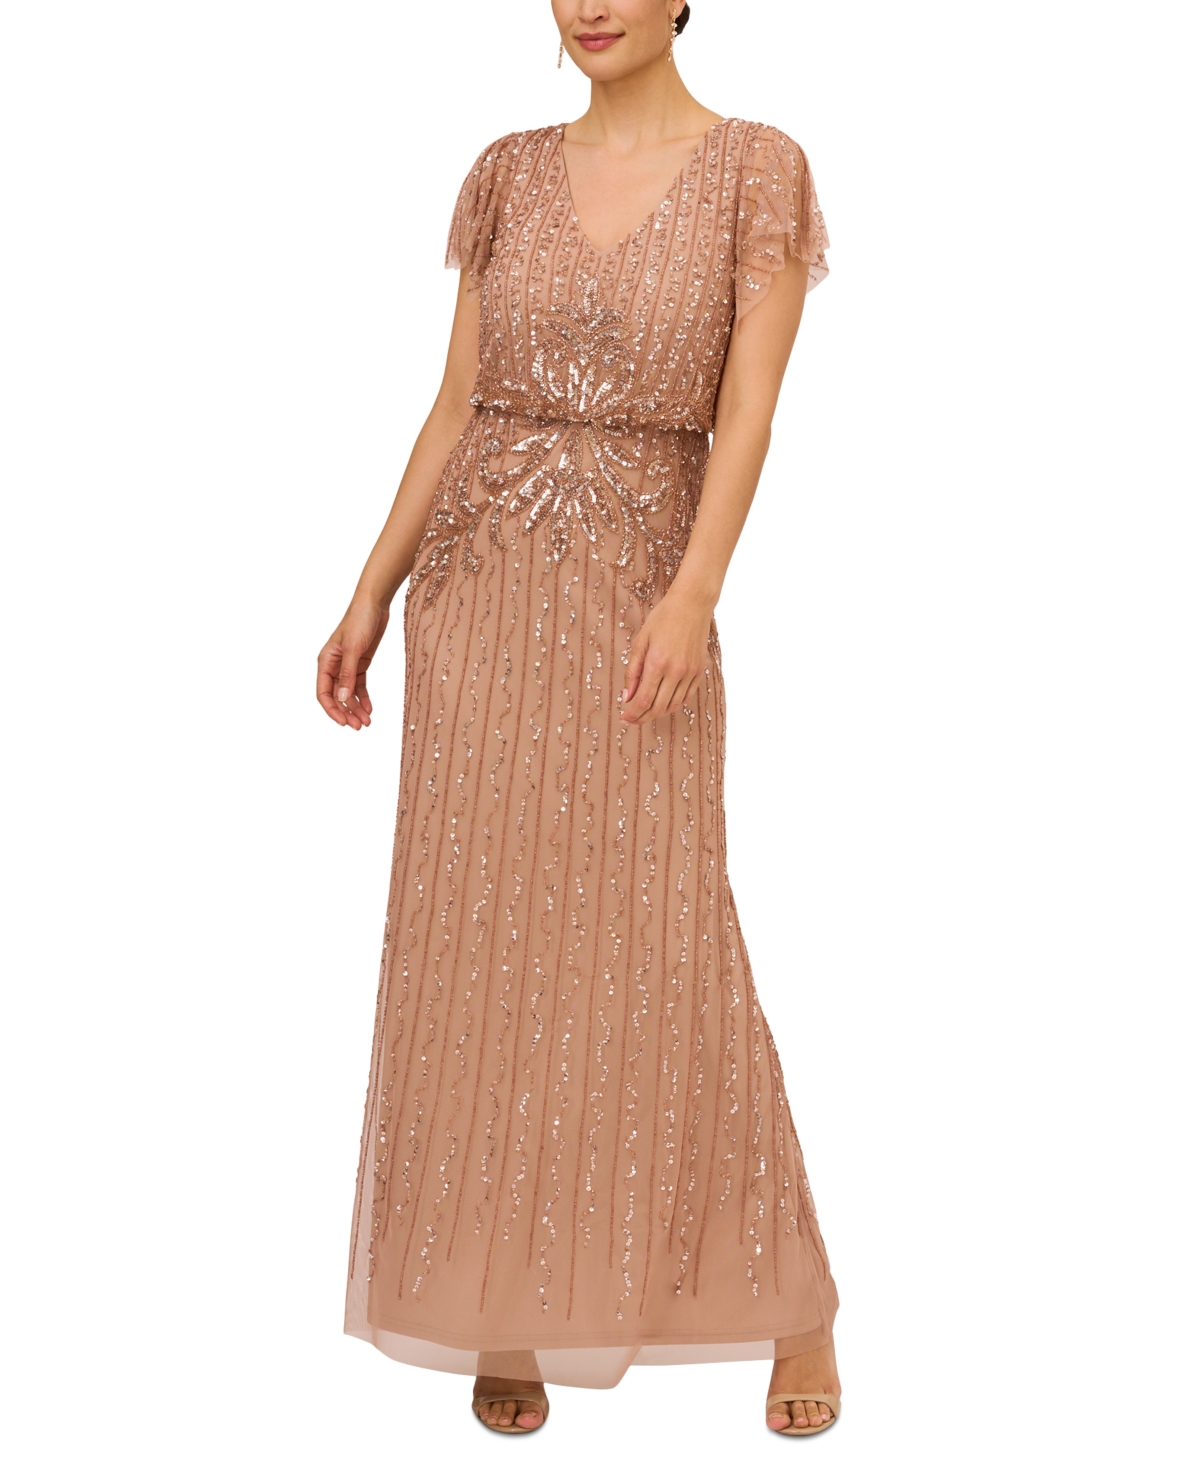 Great Gatsby Dress – Great Gatsby Dresses for Sale Adrianna Papell Womens Beaded Flutter-Sleeve Gown - Rose Gold $249.00 AT vintagedancer.com